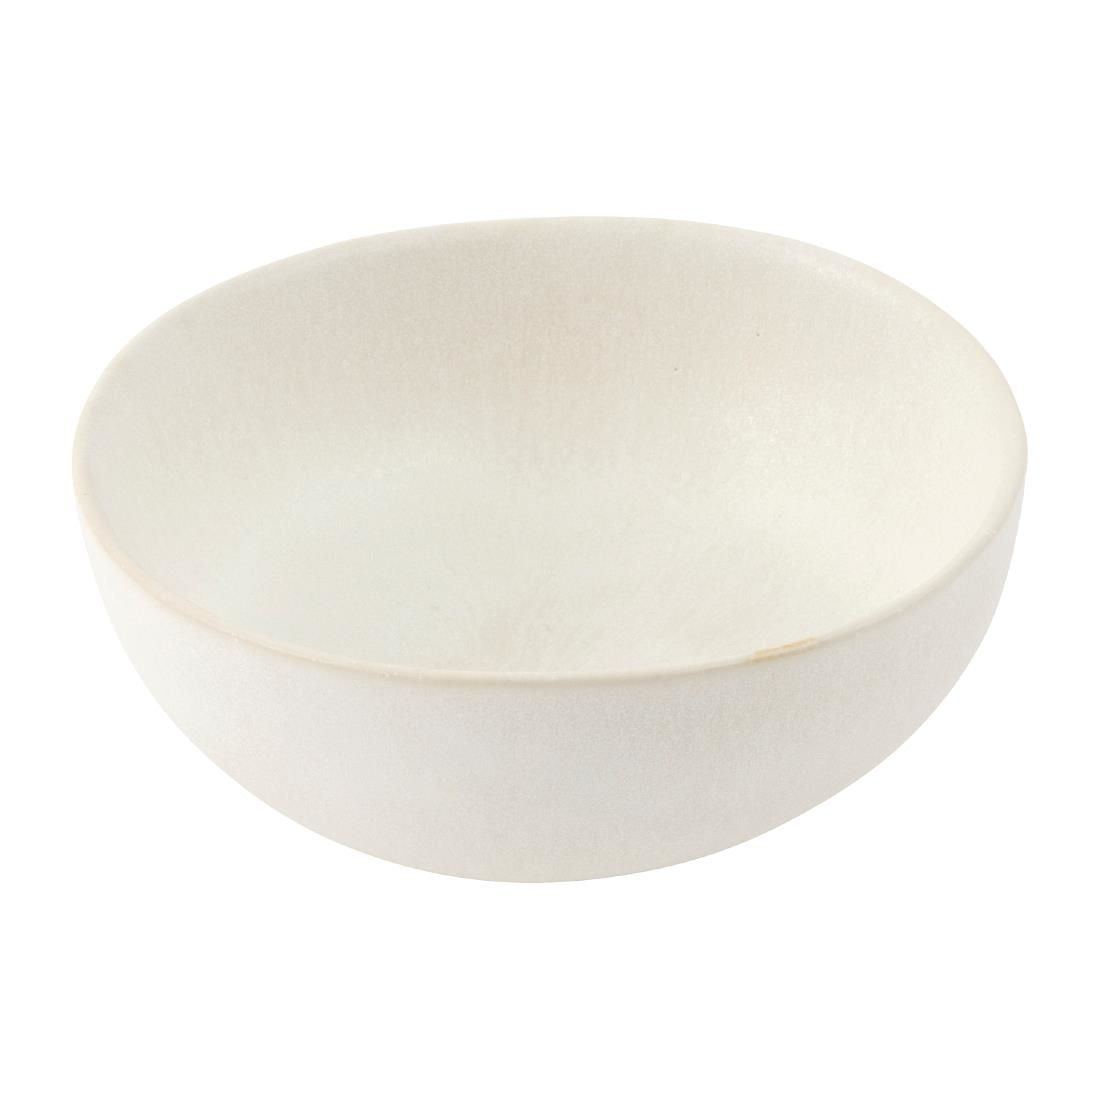 FC700 Olympia Build-a-Bowl White Deep Bowls 110mm (Pack of 12) JD Catering Equipment Solutions Ltd